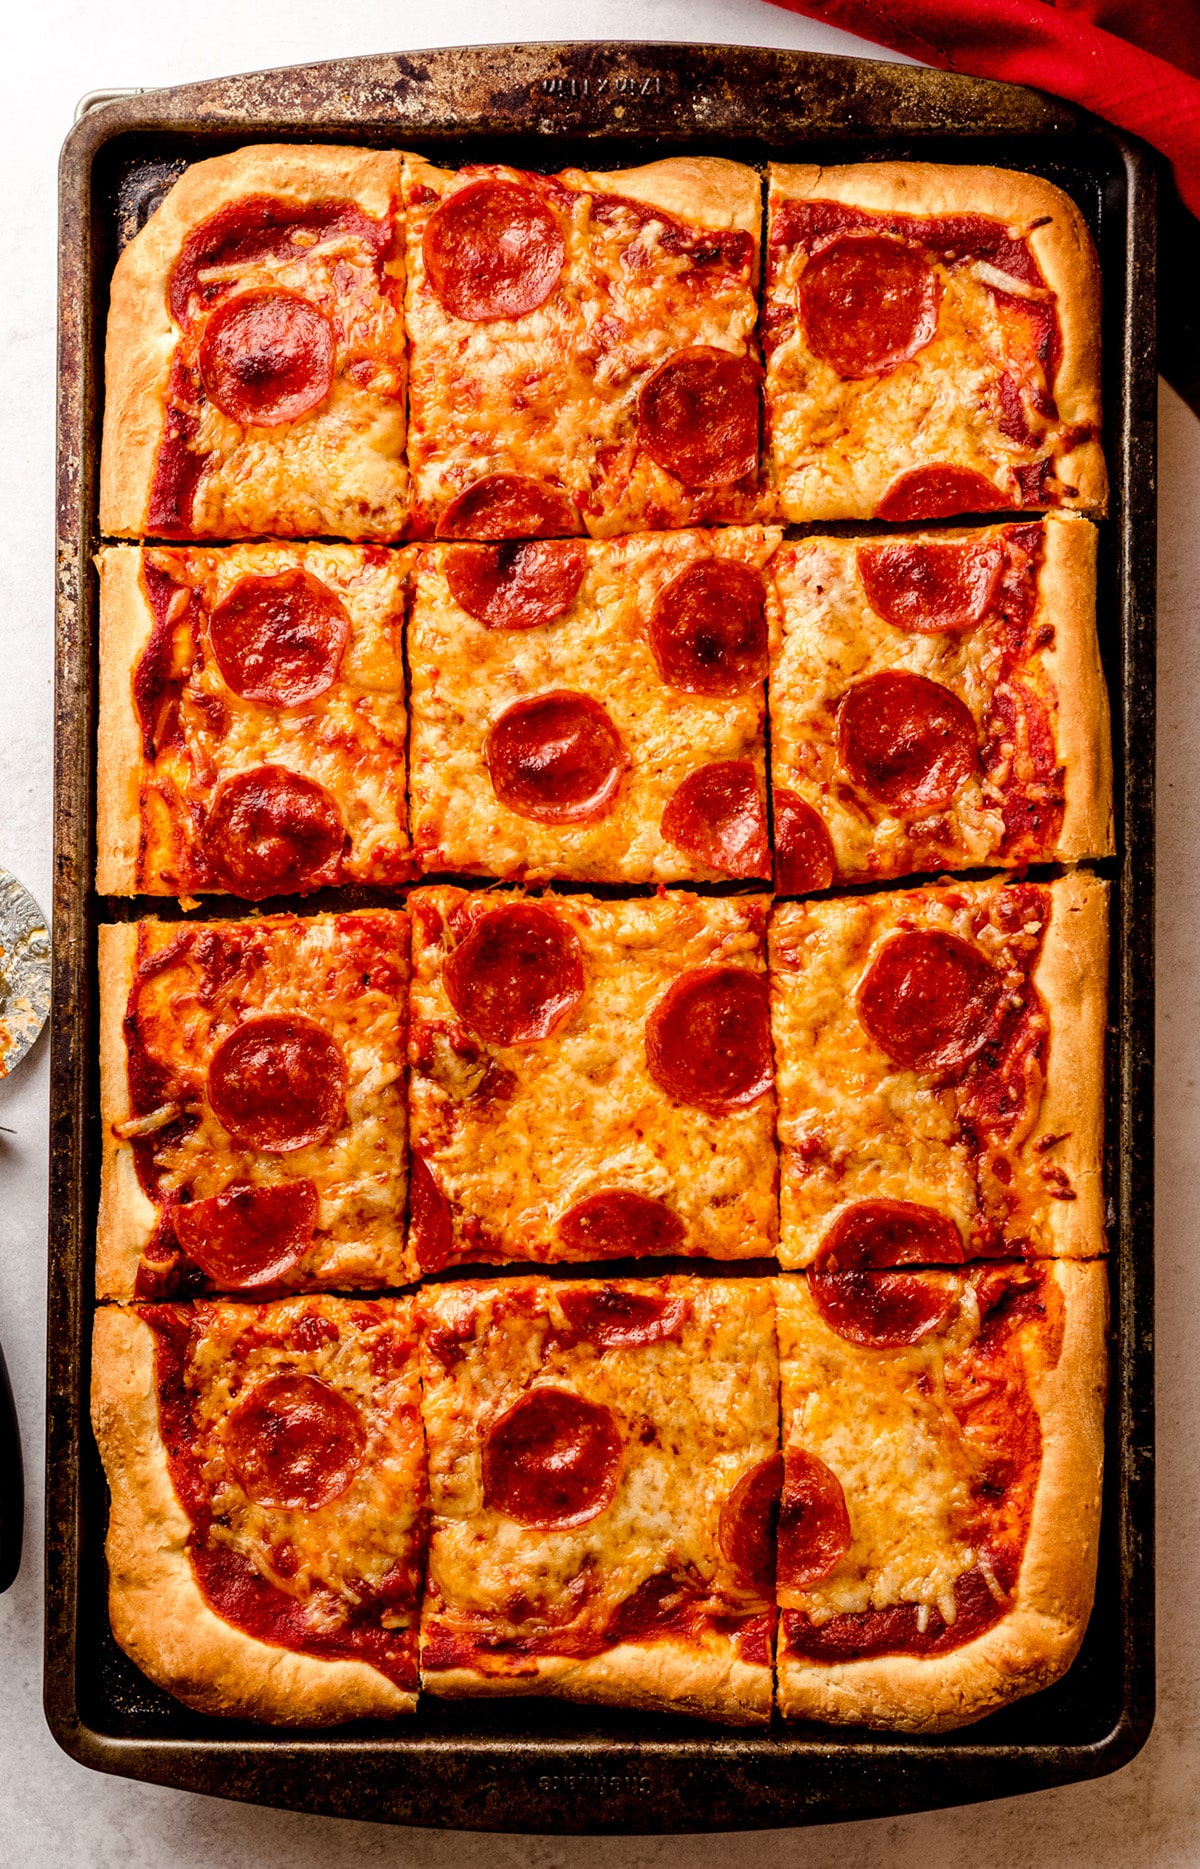 A large rectangular pizza, cut into square slices.